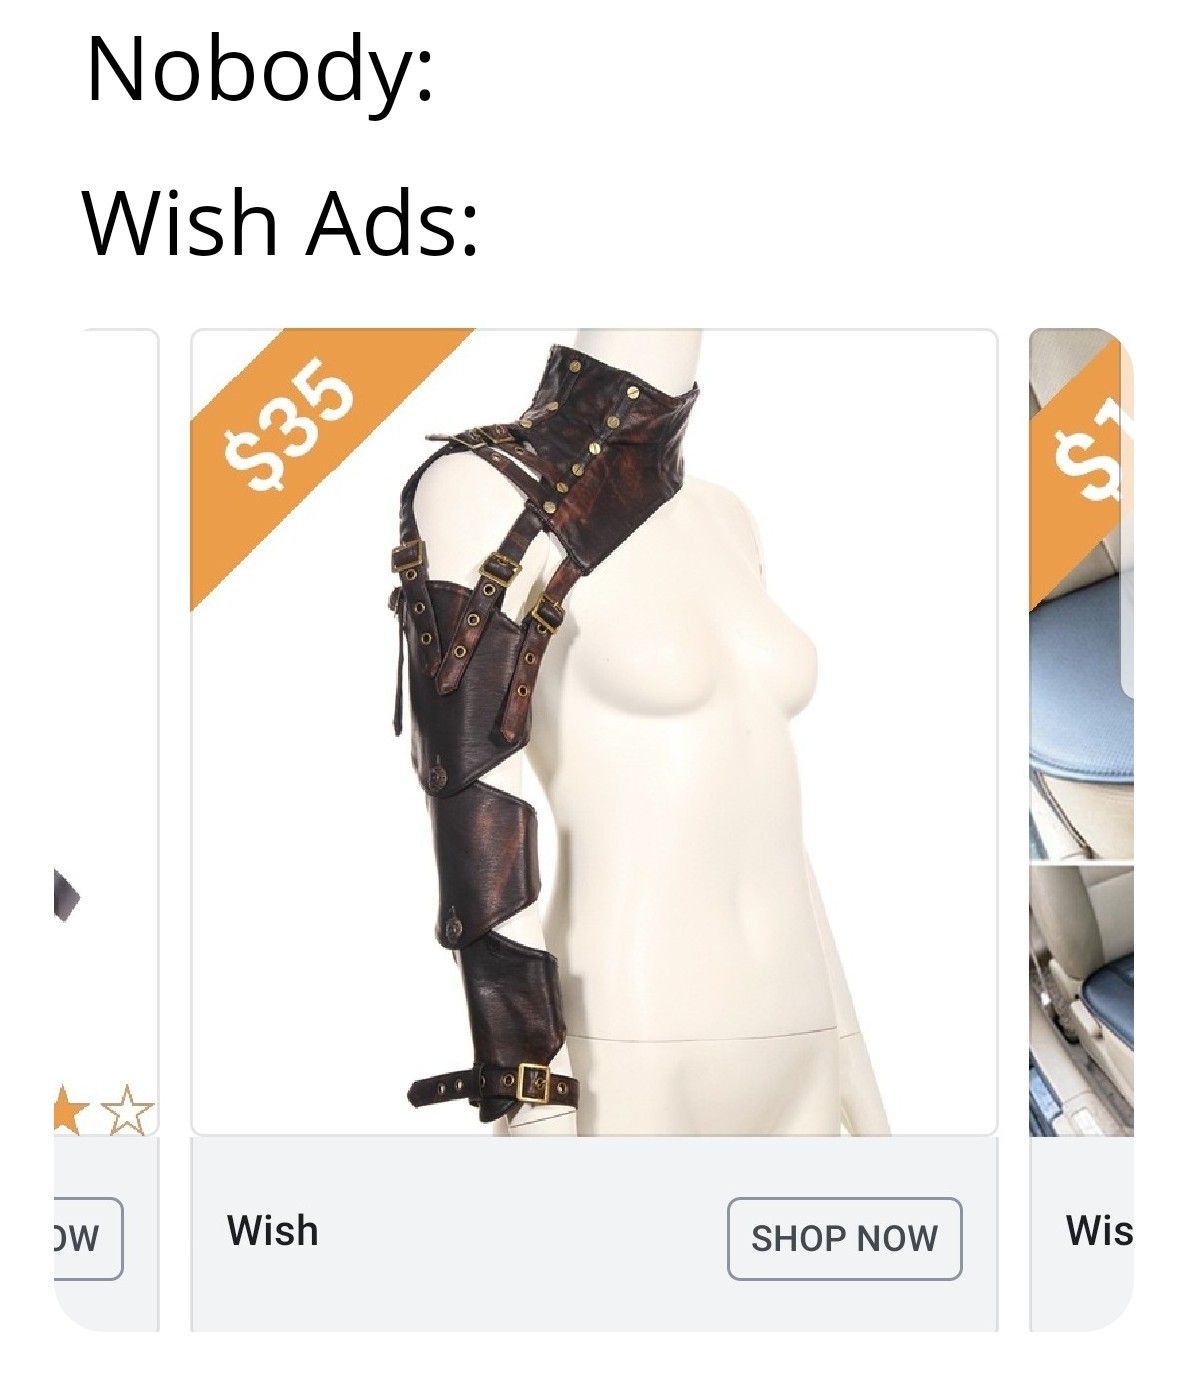 Anybody actually ever use Wish? I haven't seen anything worth buying there - meme